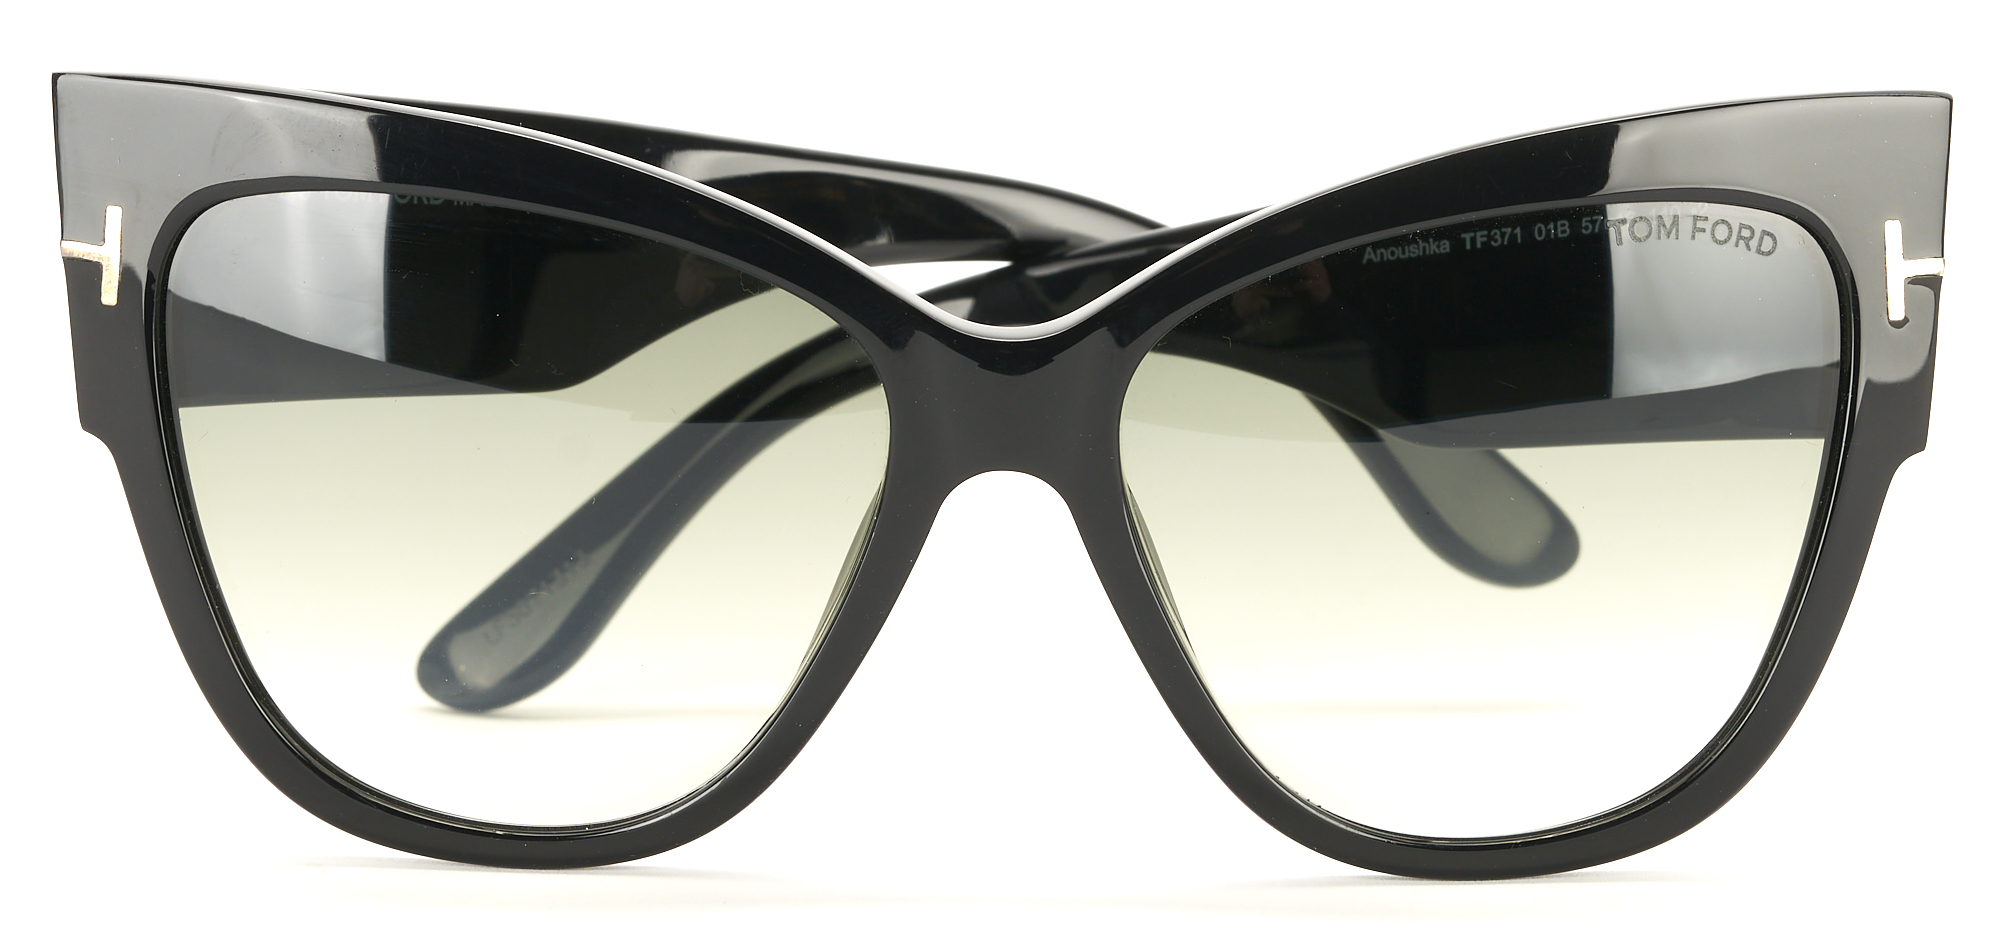 Lot 1209: 4 Tom Ford items, incl. Anoushka Sunglasses | Case Auctions